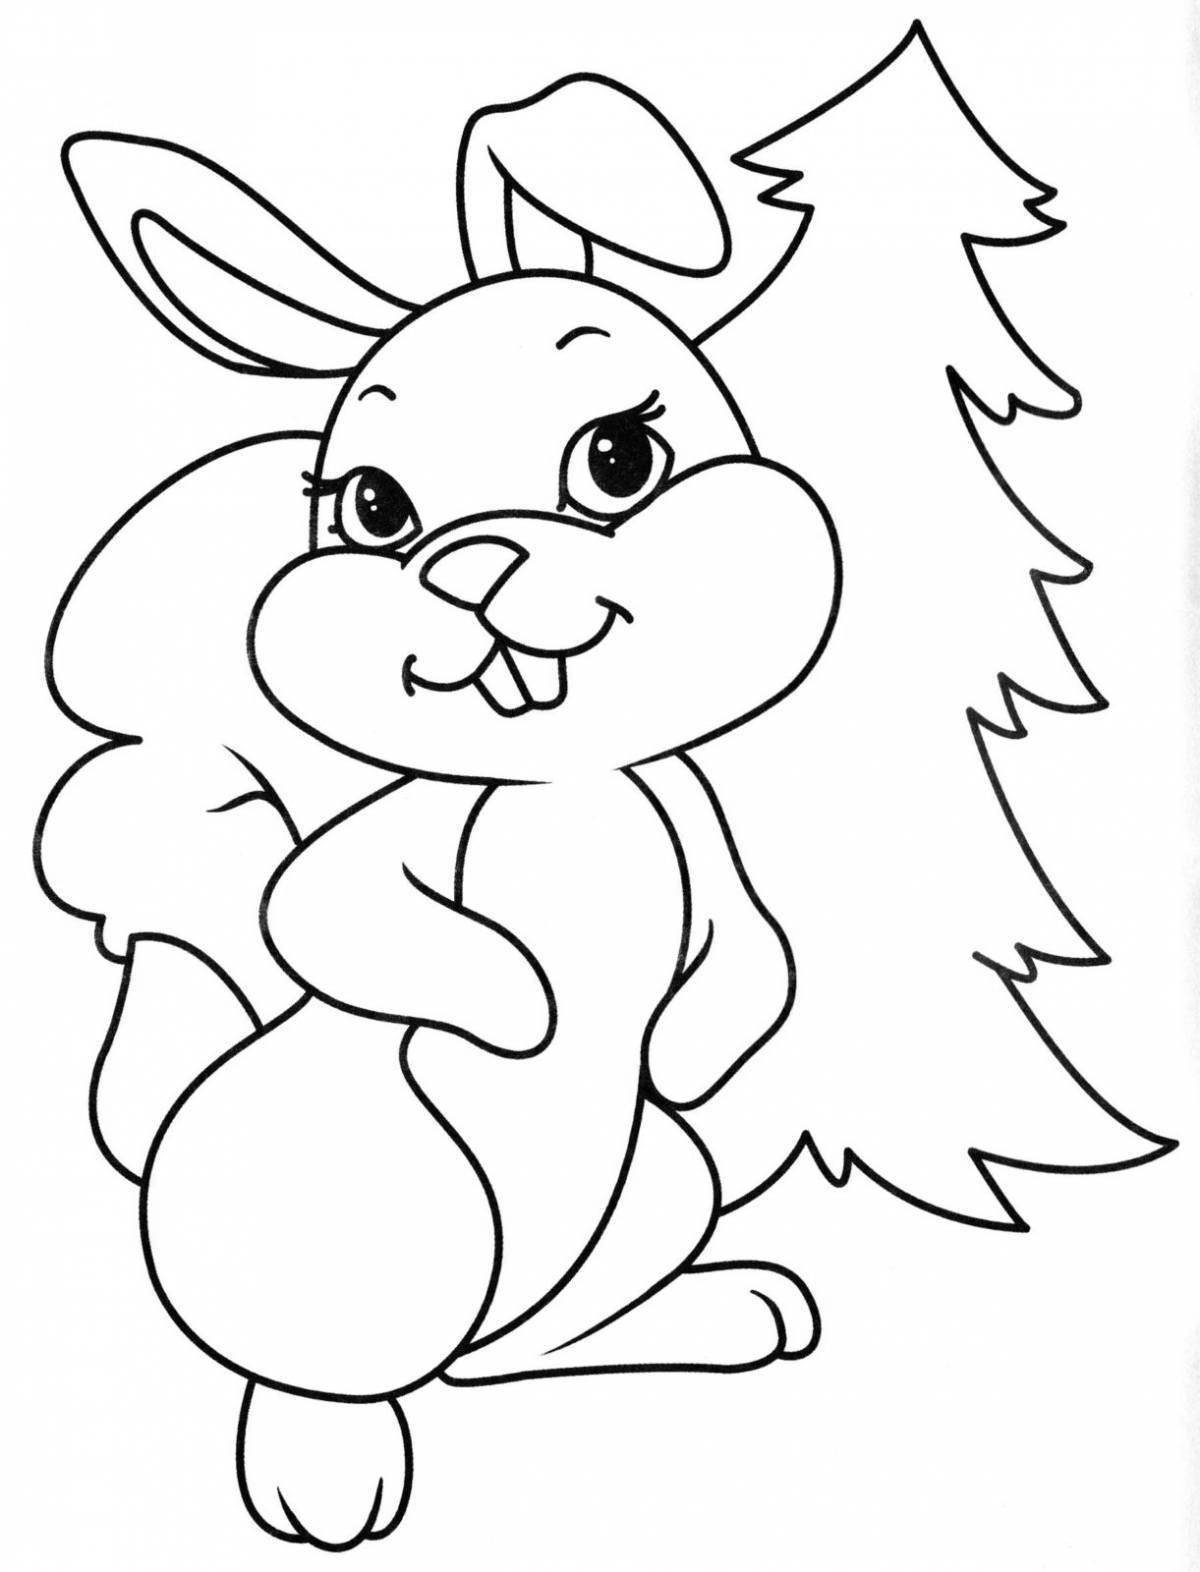 Colorful rabbit coloring book for children 2-3 years old